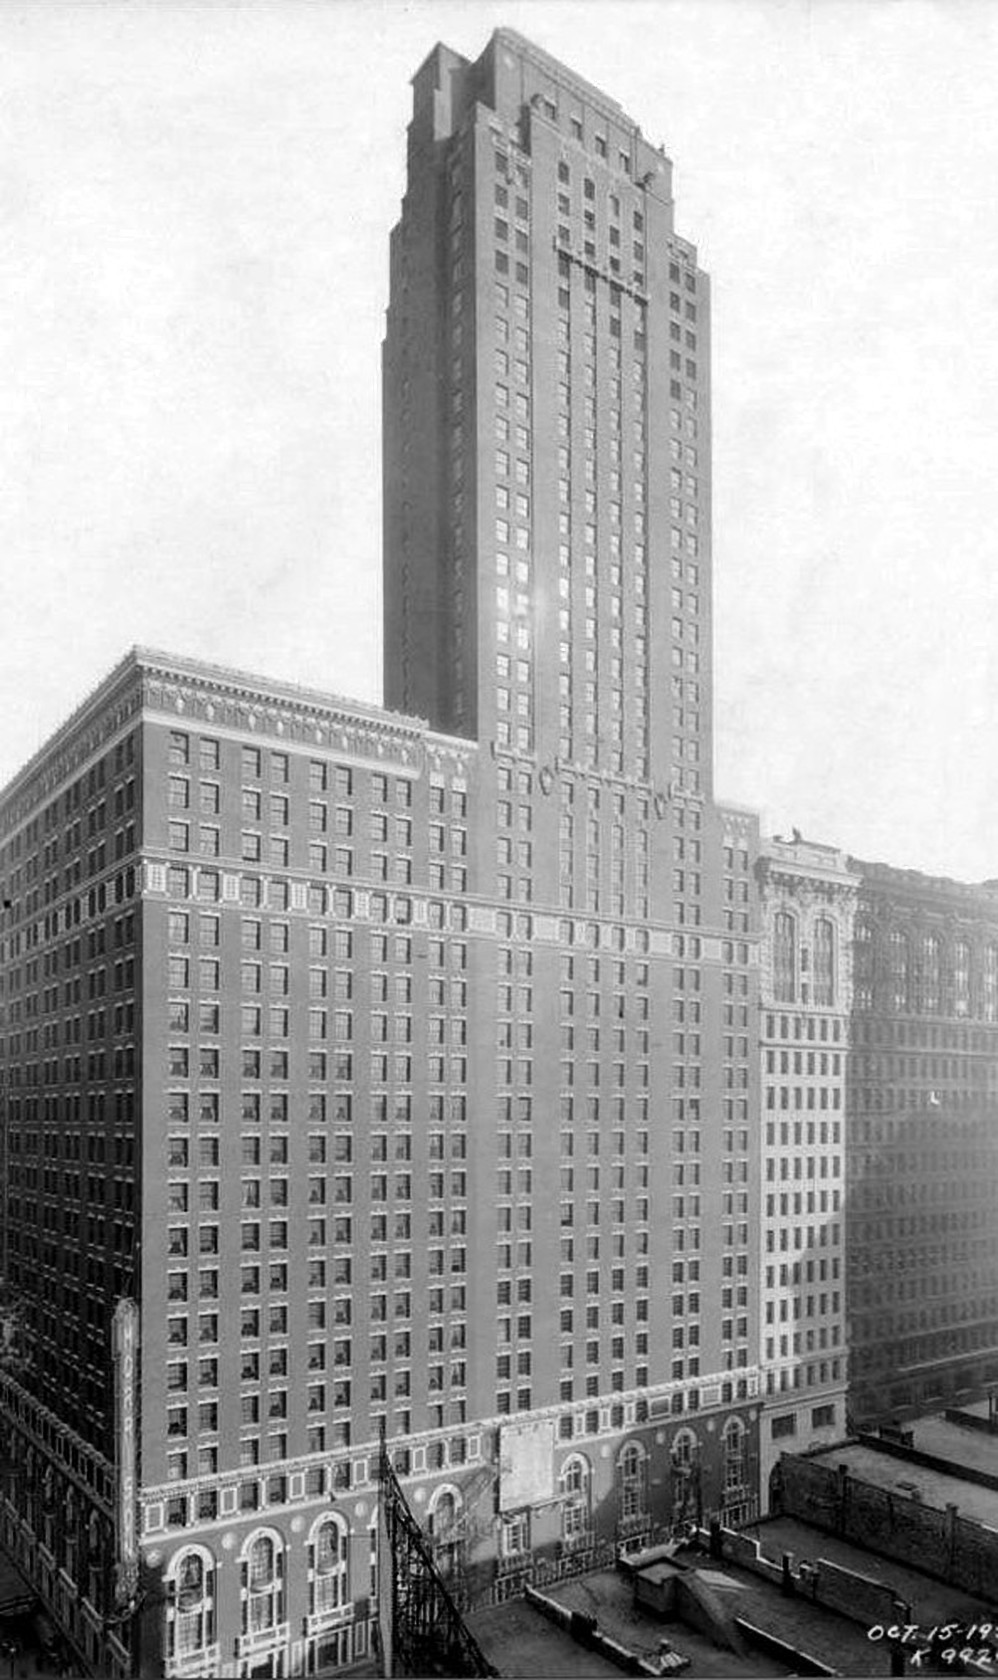 The 45-storey Morrison Hotel was completed in 1925.